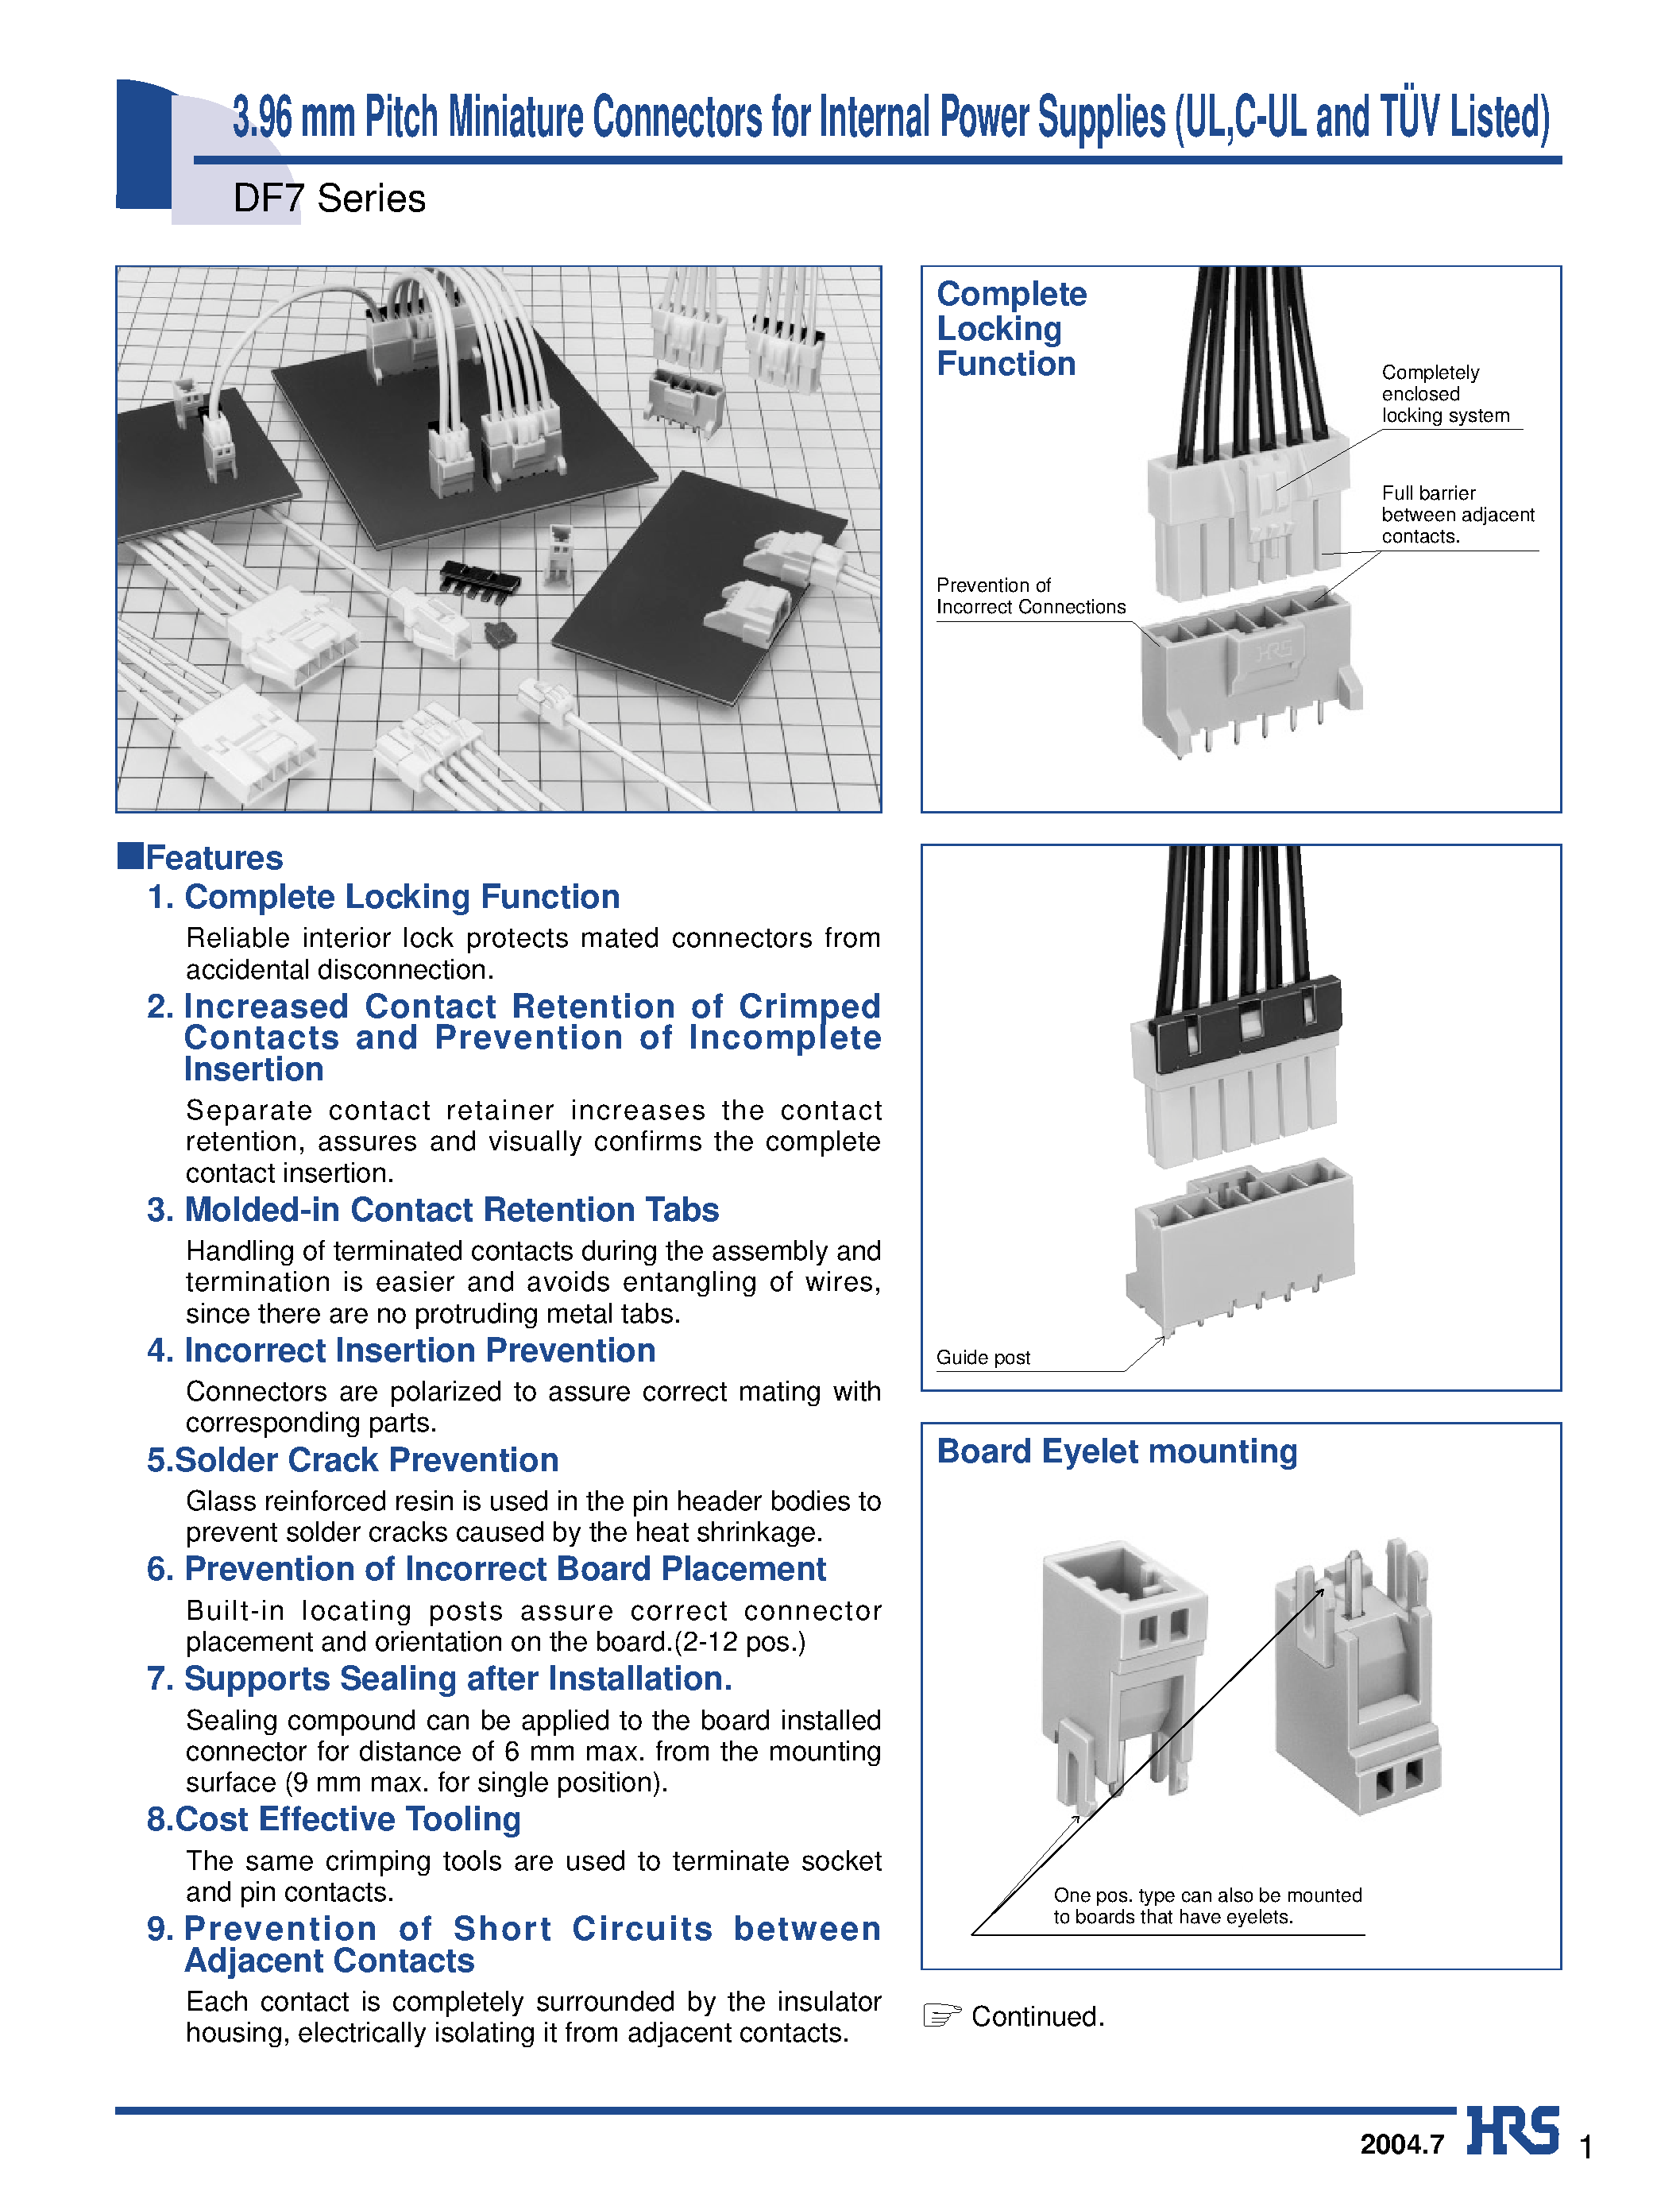 Datasheet DF7-1EP-3.96DSA - 3.96 mm Pitch Miniature Connectors for Internal Power Supplies (UL /C-UL and TUV Listed) page 1